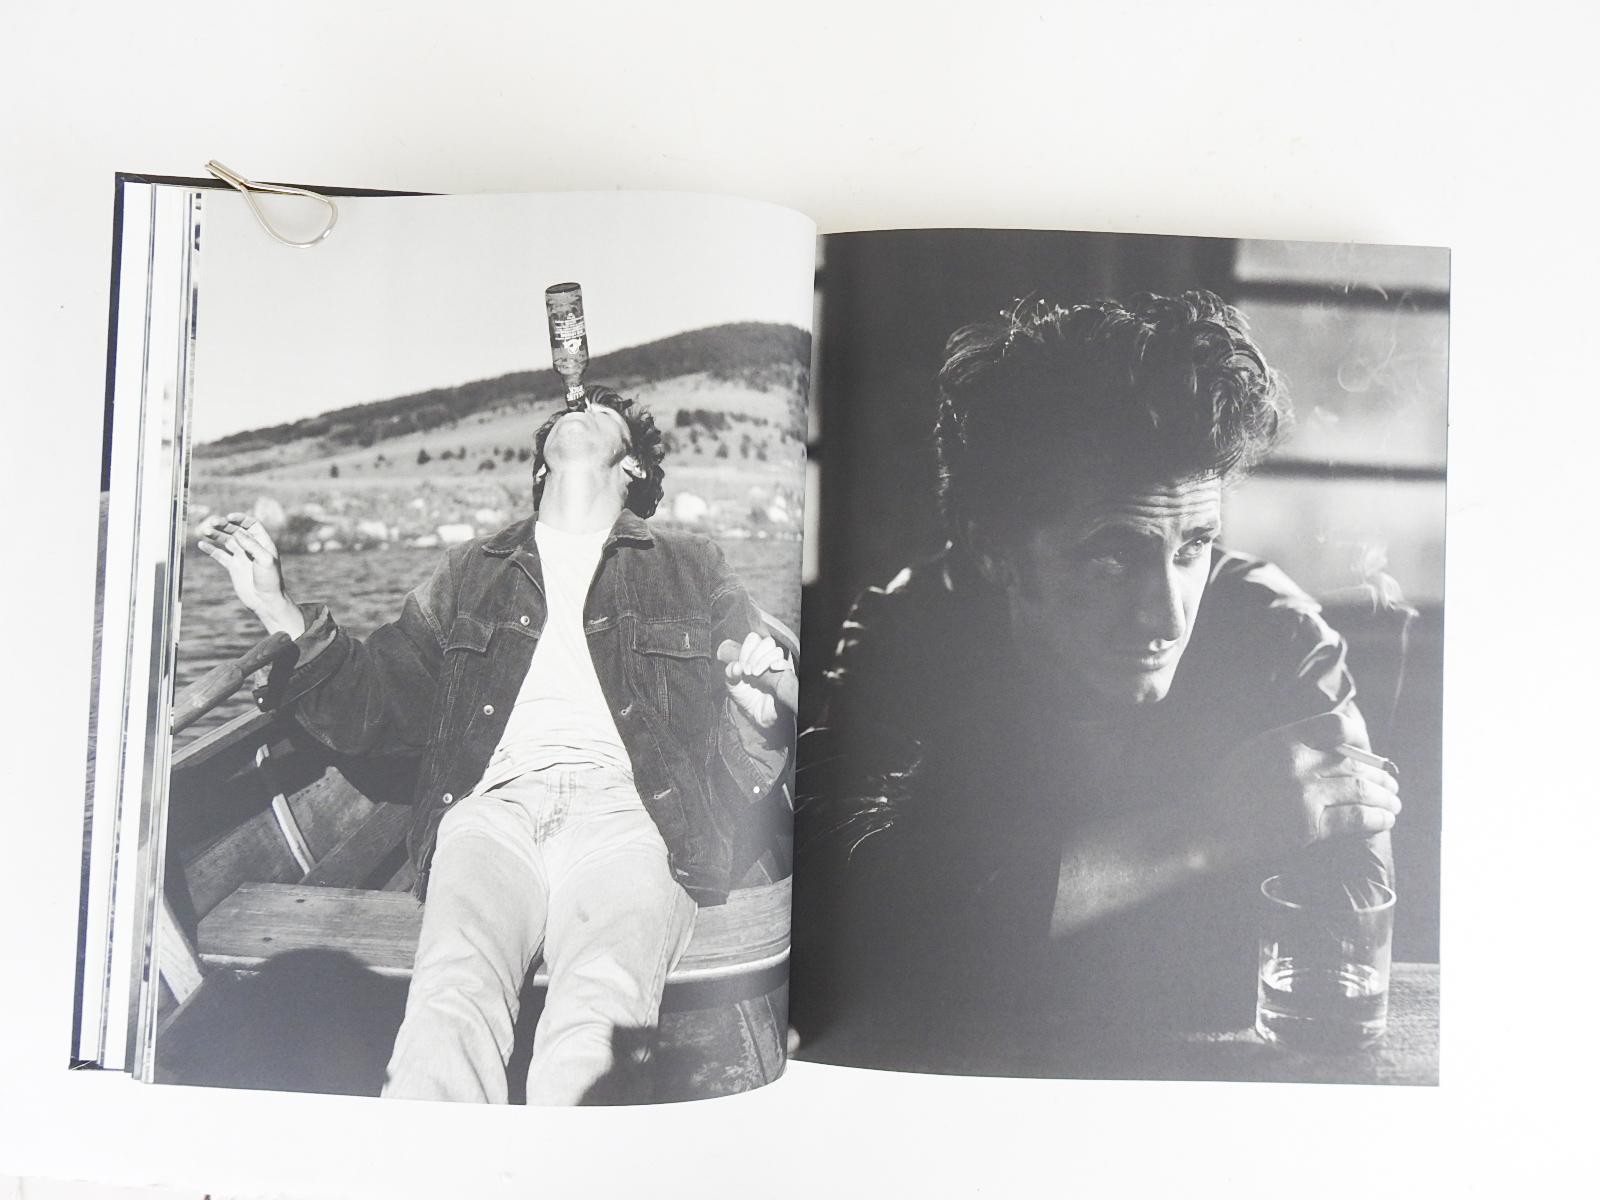 American Bruce Weber Branded Youth and Other Stories National Portrait Gallery Book For Sale